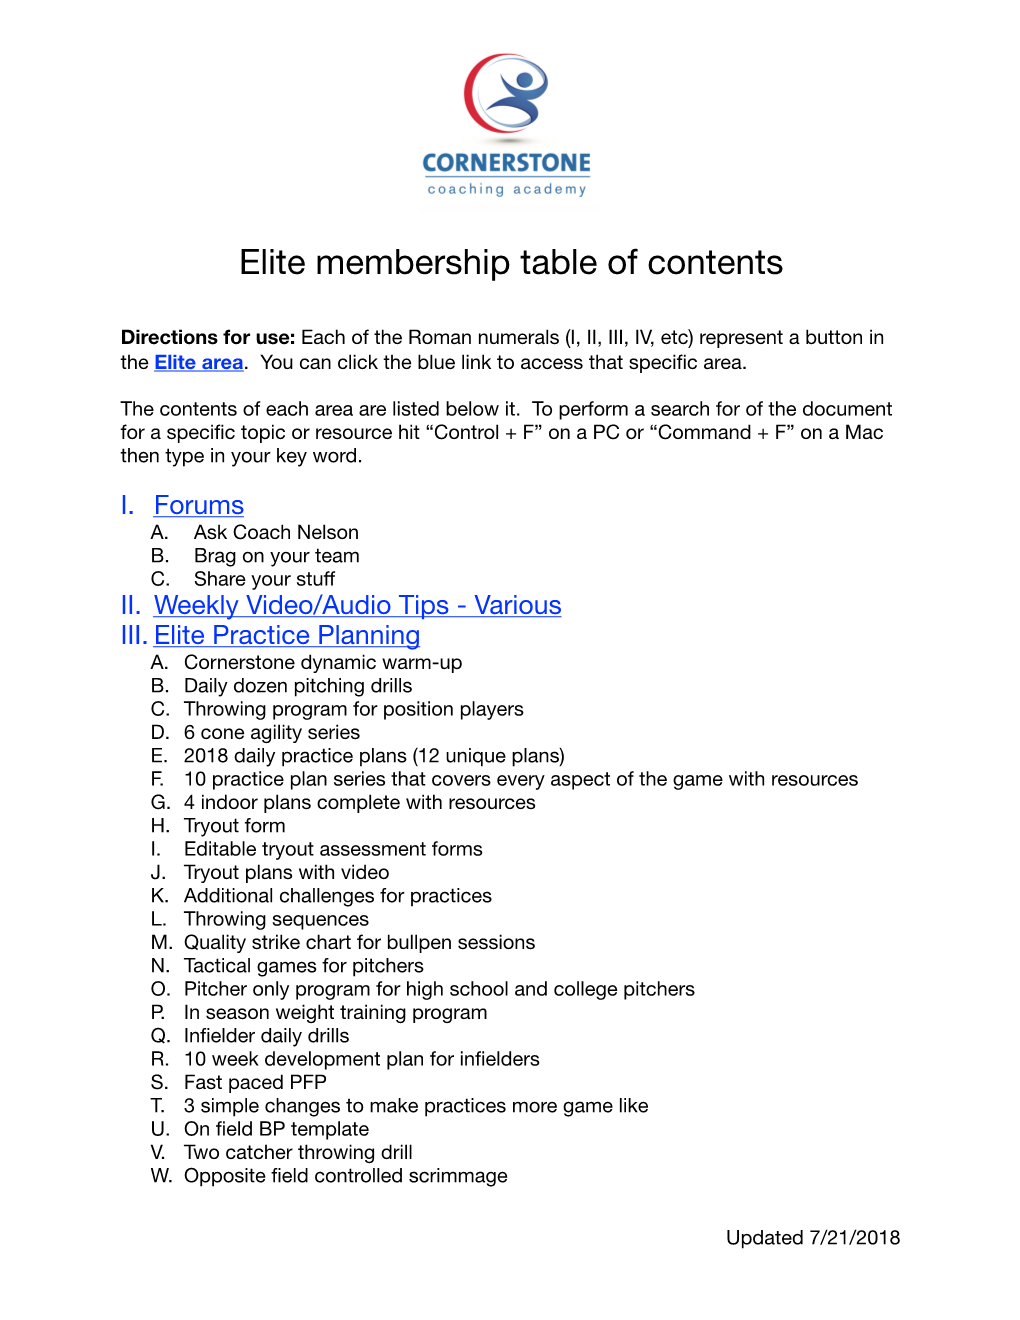 Elite Members Table of Contents